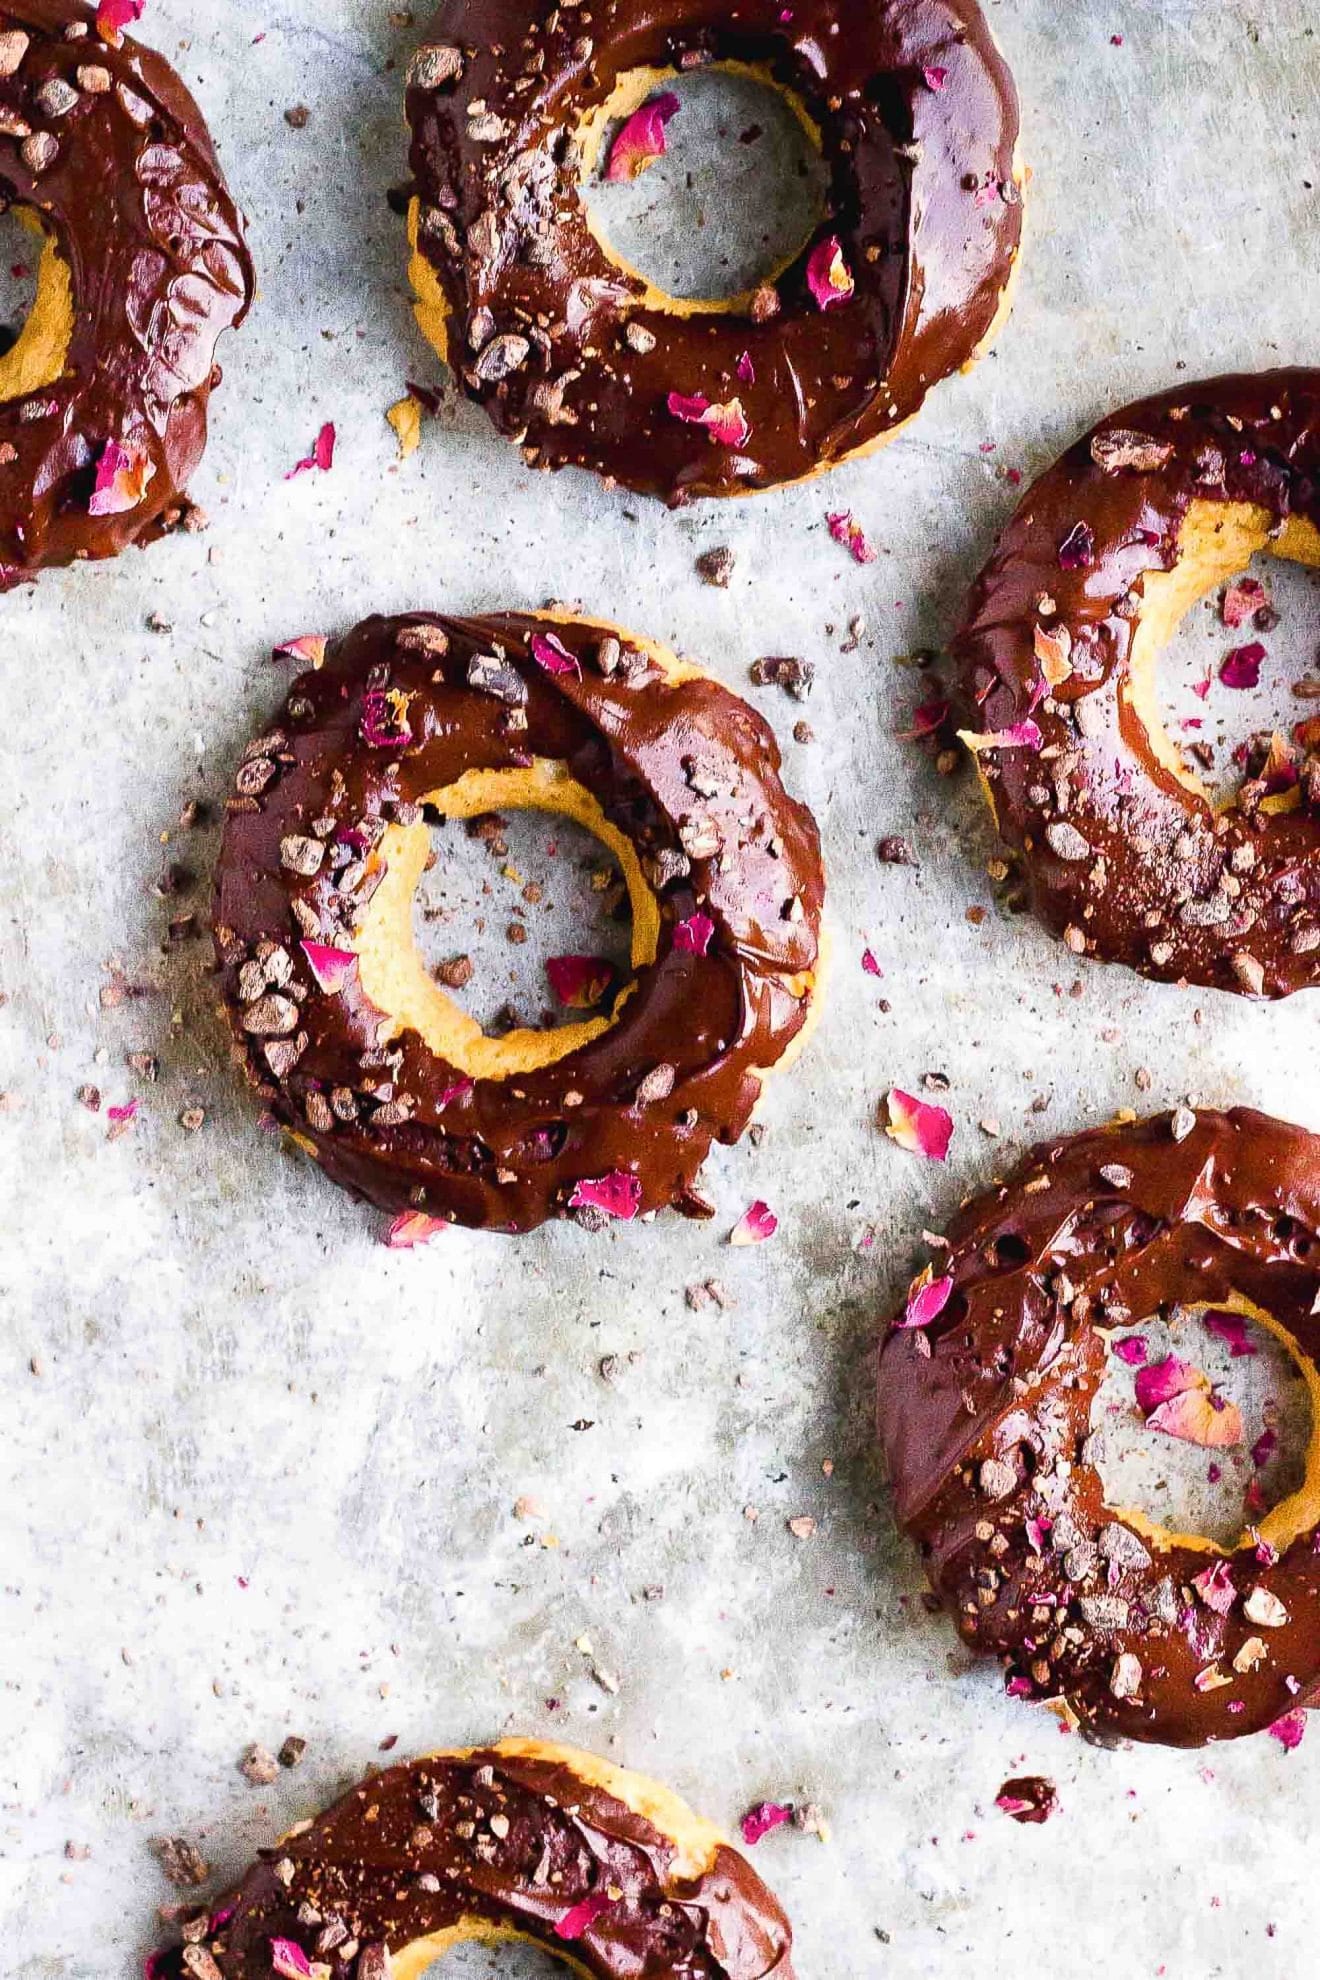 vanilla donuts with chocolate frosting and rose petals